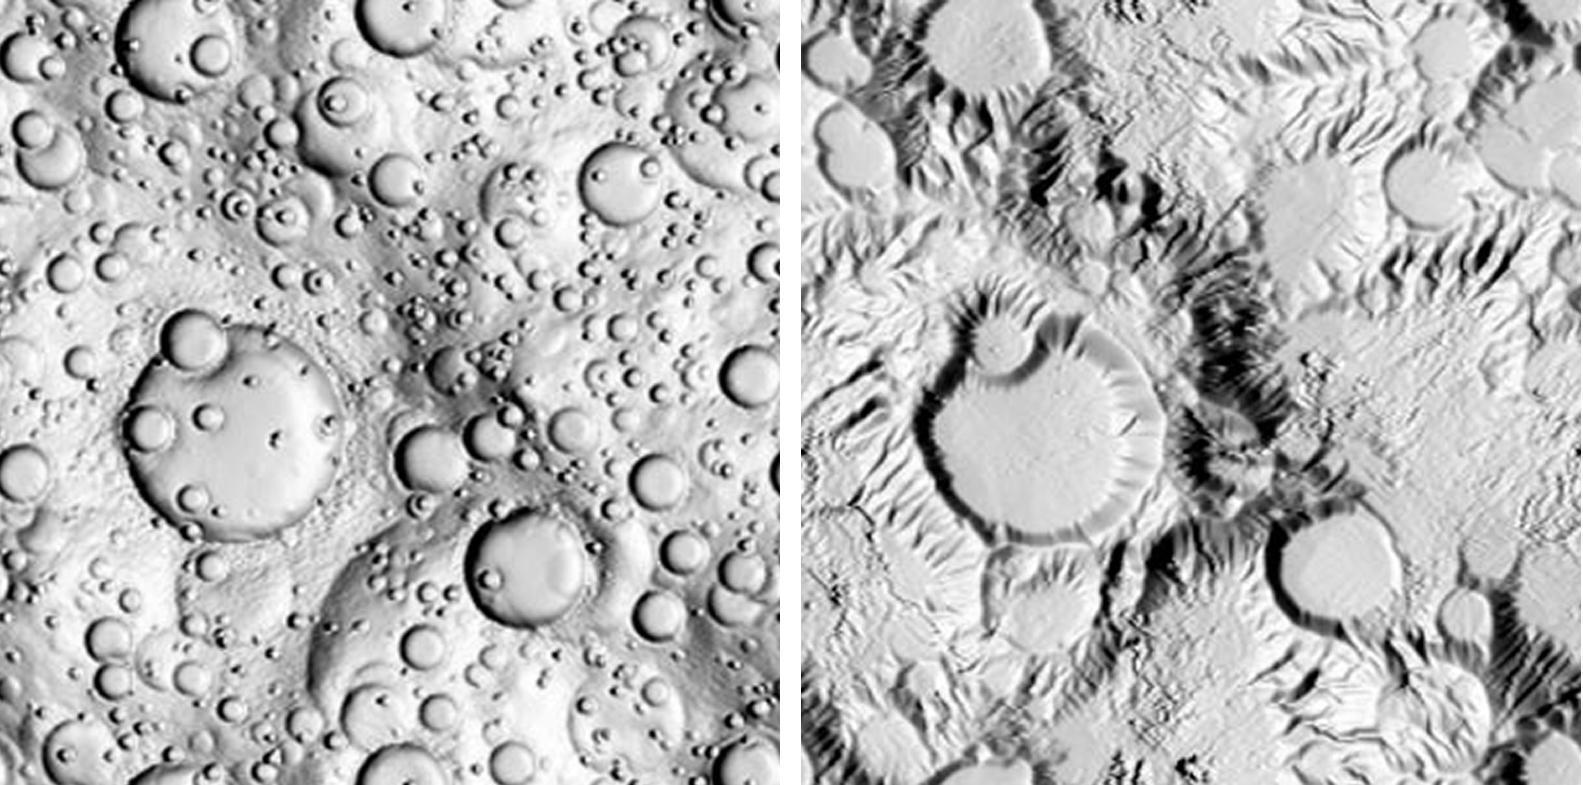 These two computer simulation models of landform evolution illustrate how, over time, rain can carve landscapes into formations that look like aspects of volcanoes.